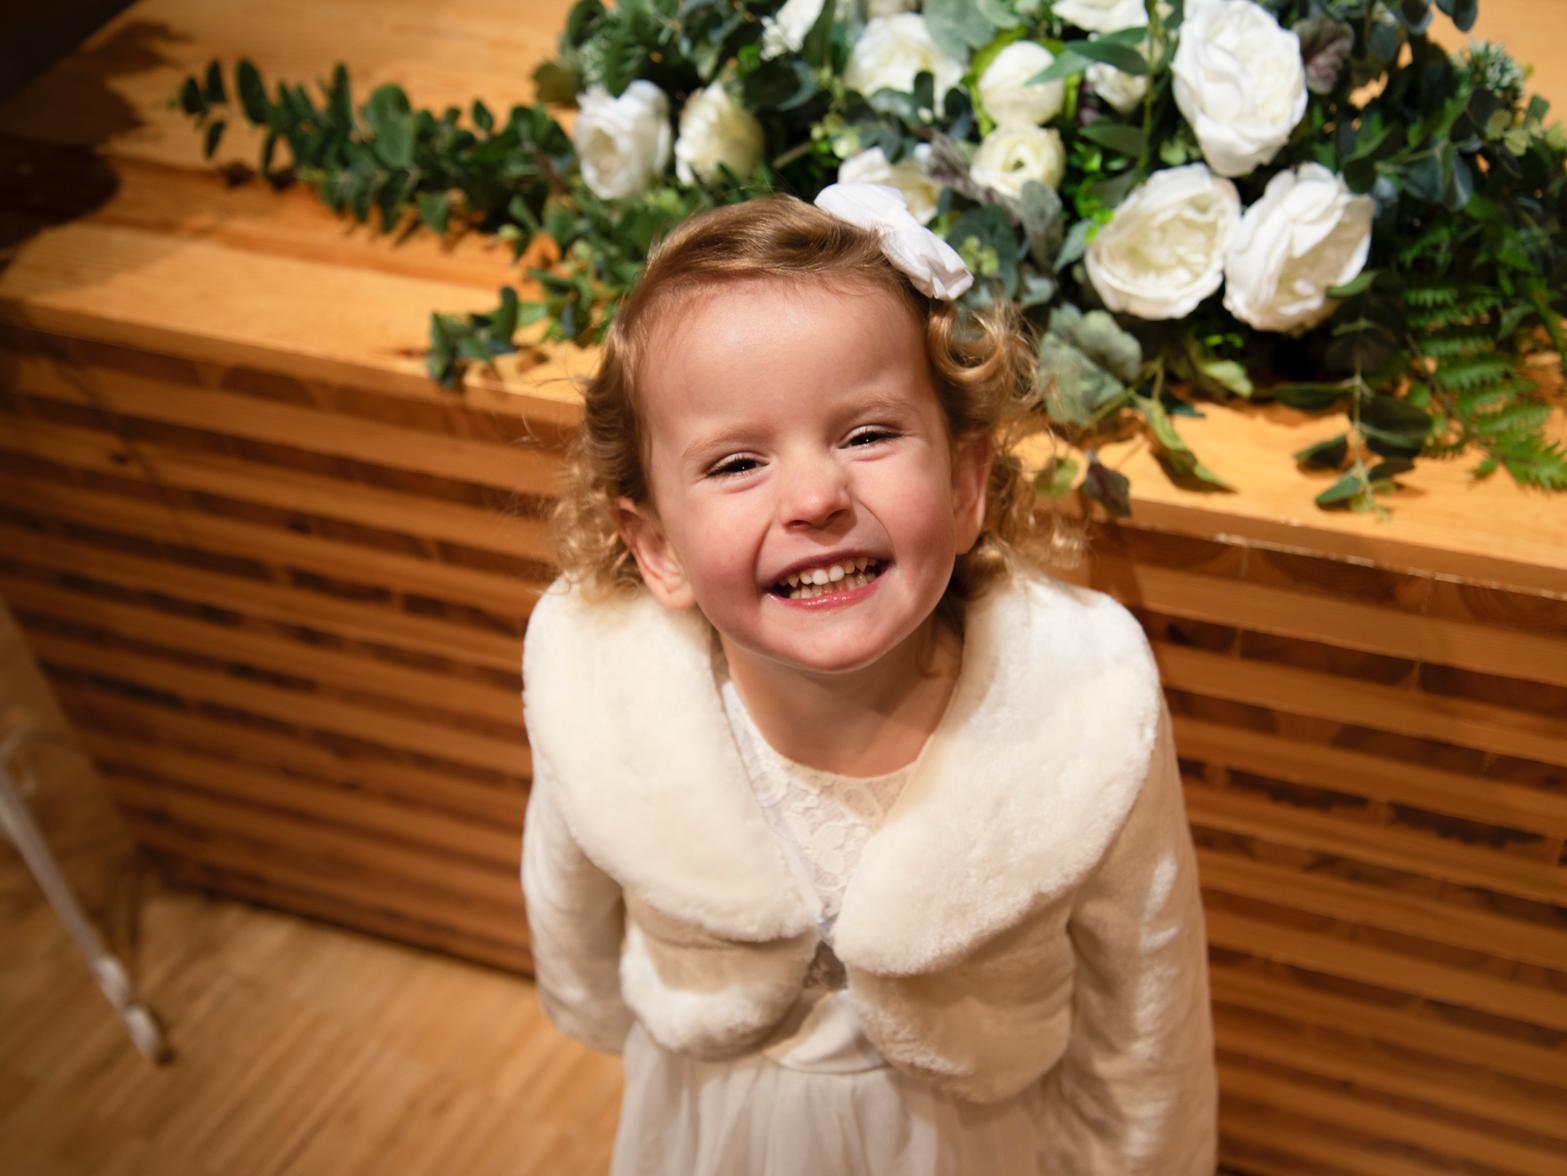 Their little girl Evelyn Grace was flower girl and she wore a beautiful dress from House of Fraser.